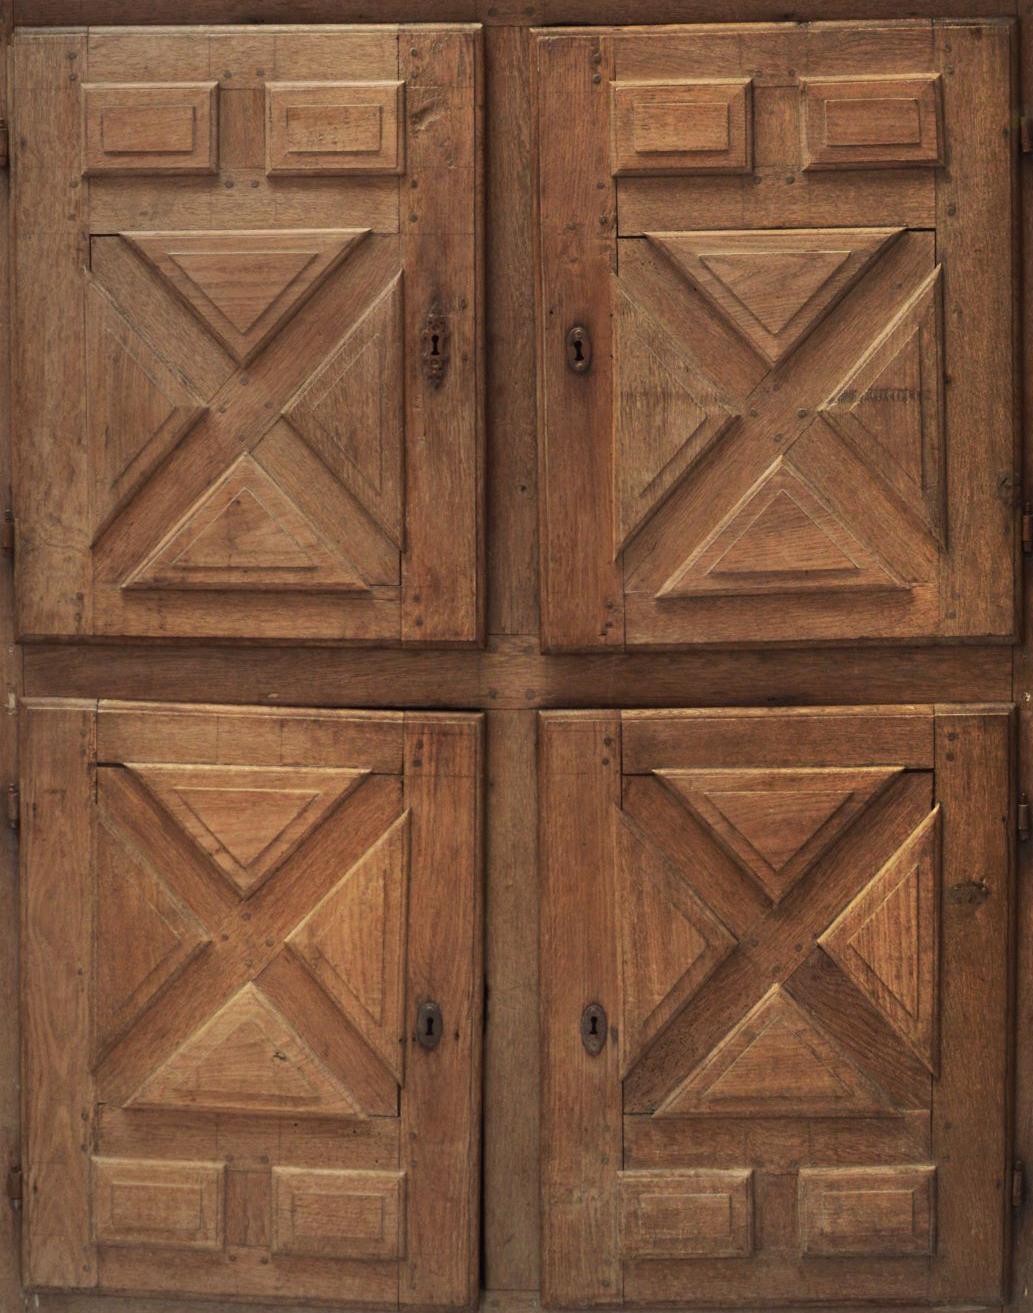 Rustic, country style French bleached oak cupboard dating from the 18th century.
The cupboard has 4 carved doors with a simple geometric motif giving it excellent decorative appeal in many settings.